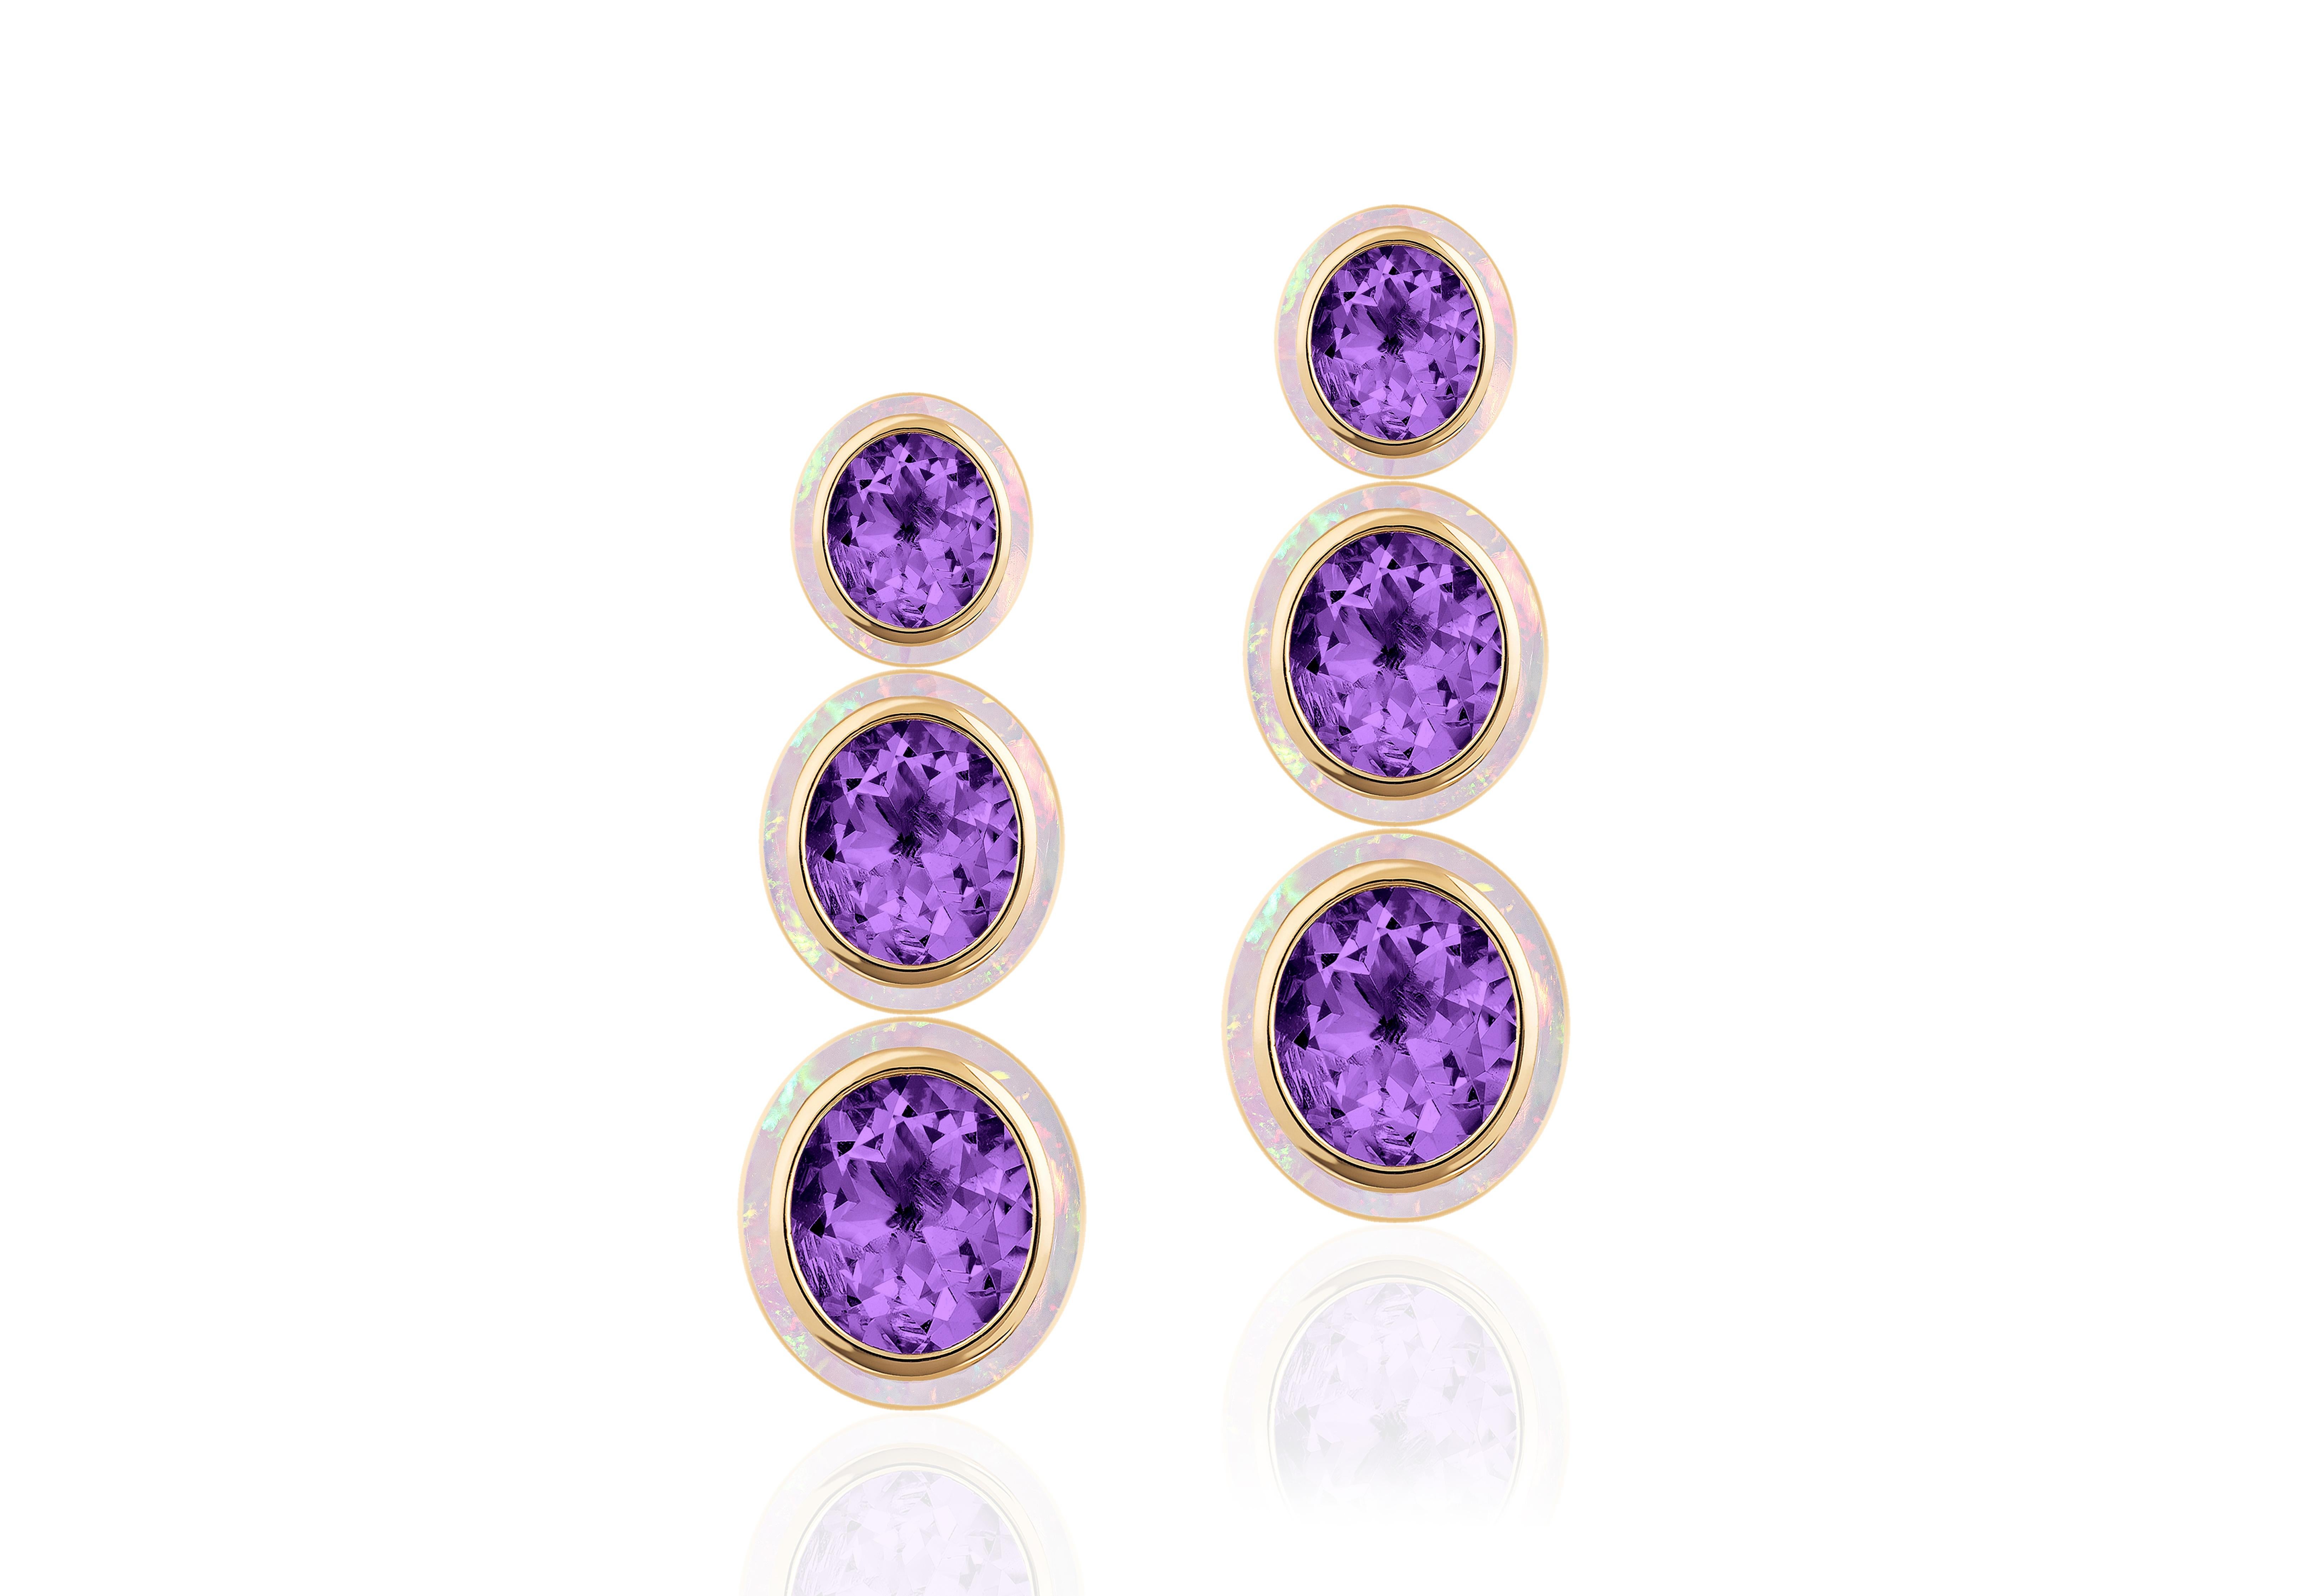 These 3-tier Oval Shape Amethyst with Opal Earrings from the 